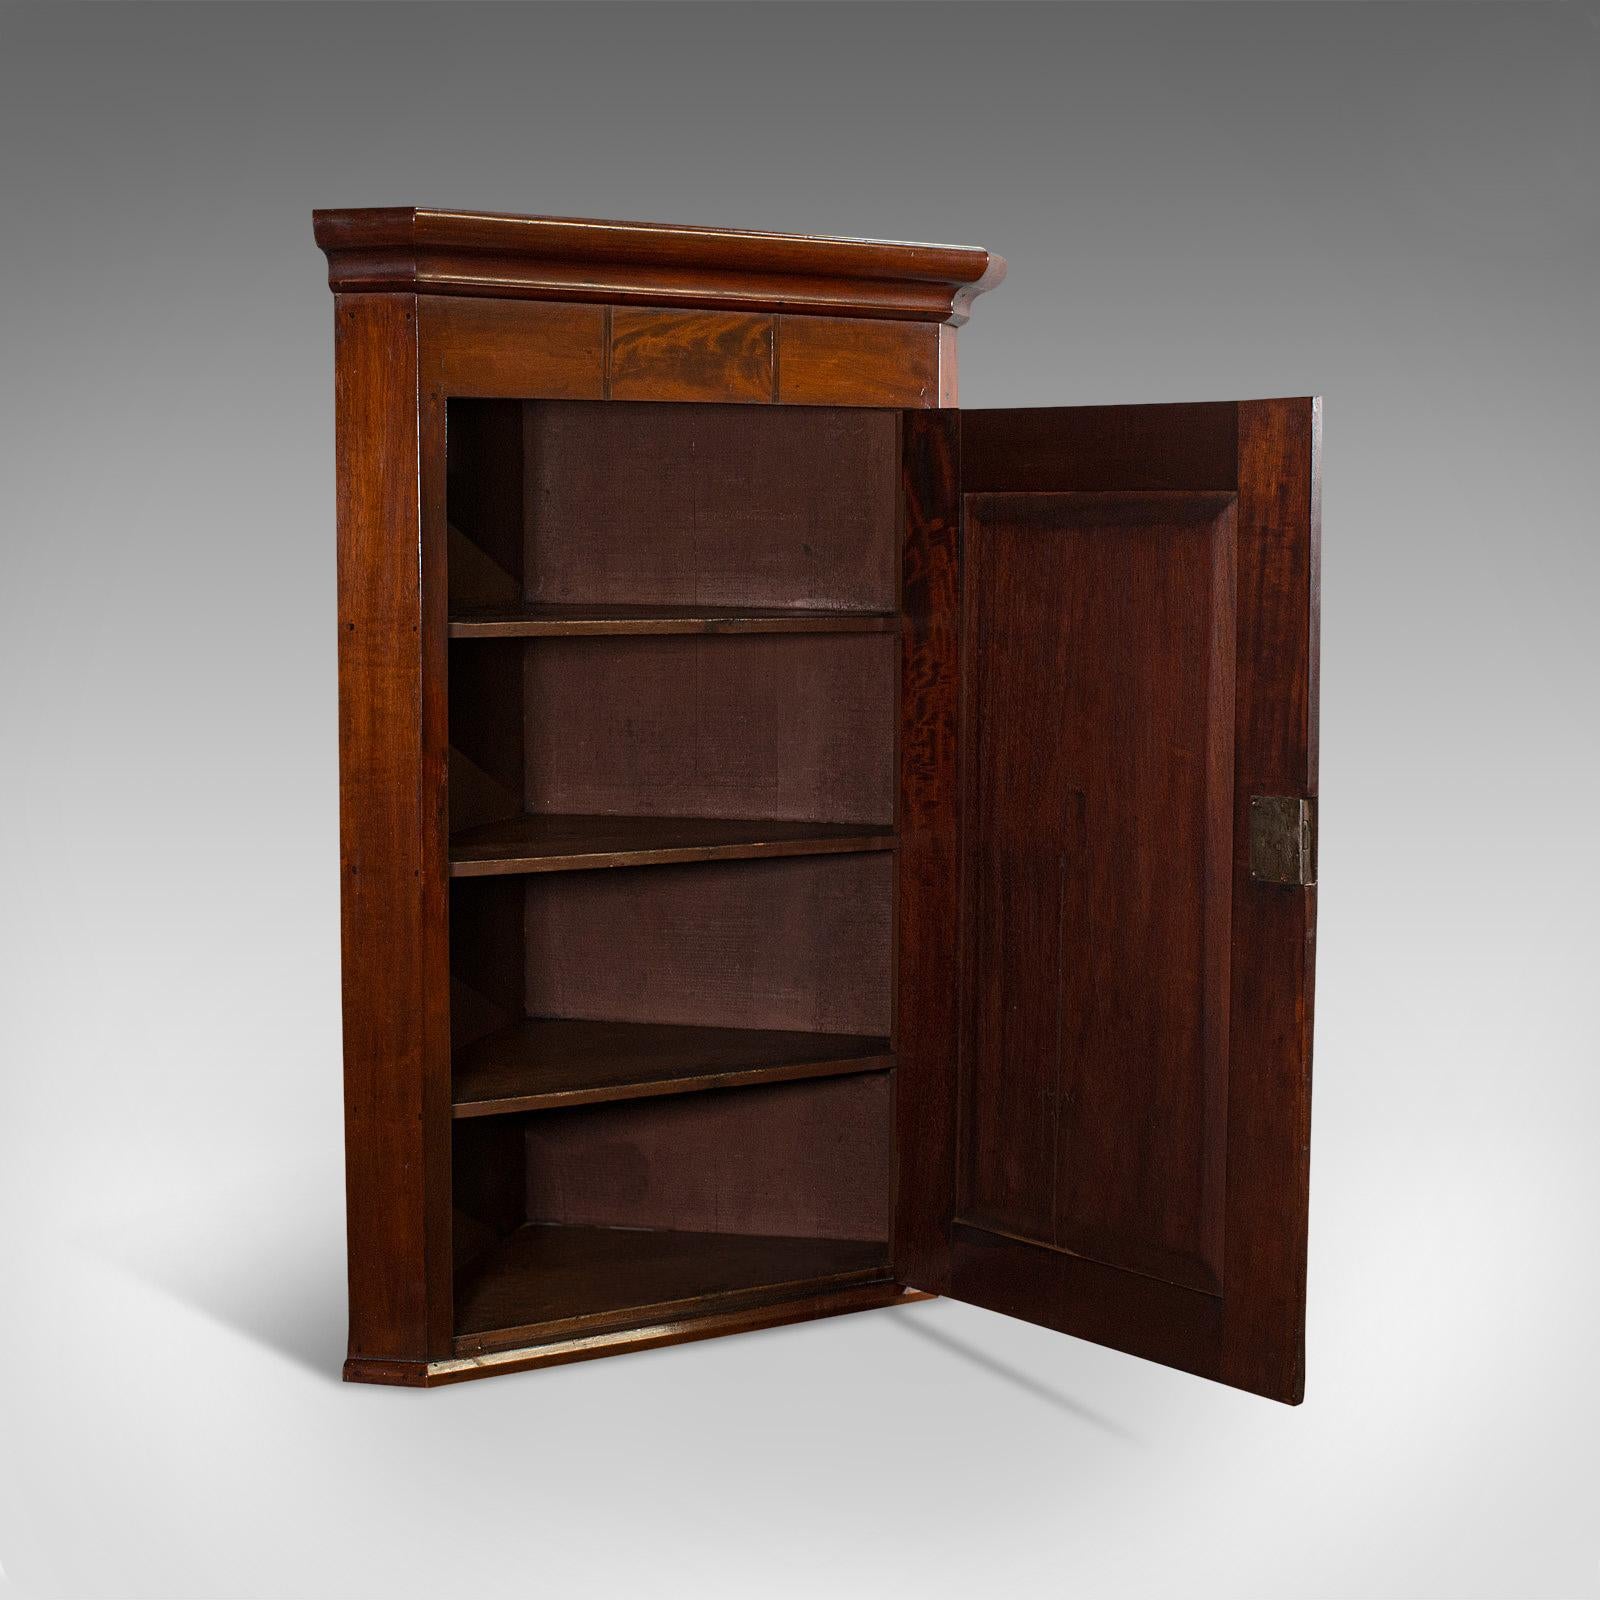 This is an antique corner cabinet. An English, mahogany and walnut cabinet with quality inlay and detail, dating to the Georgian period, circa 1800.

The superior finish exudes collectible appeal
Displaying a desirable aged patina
Select